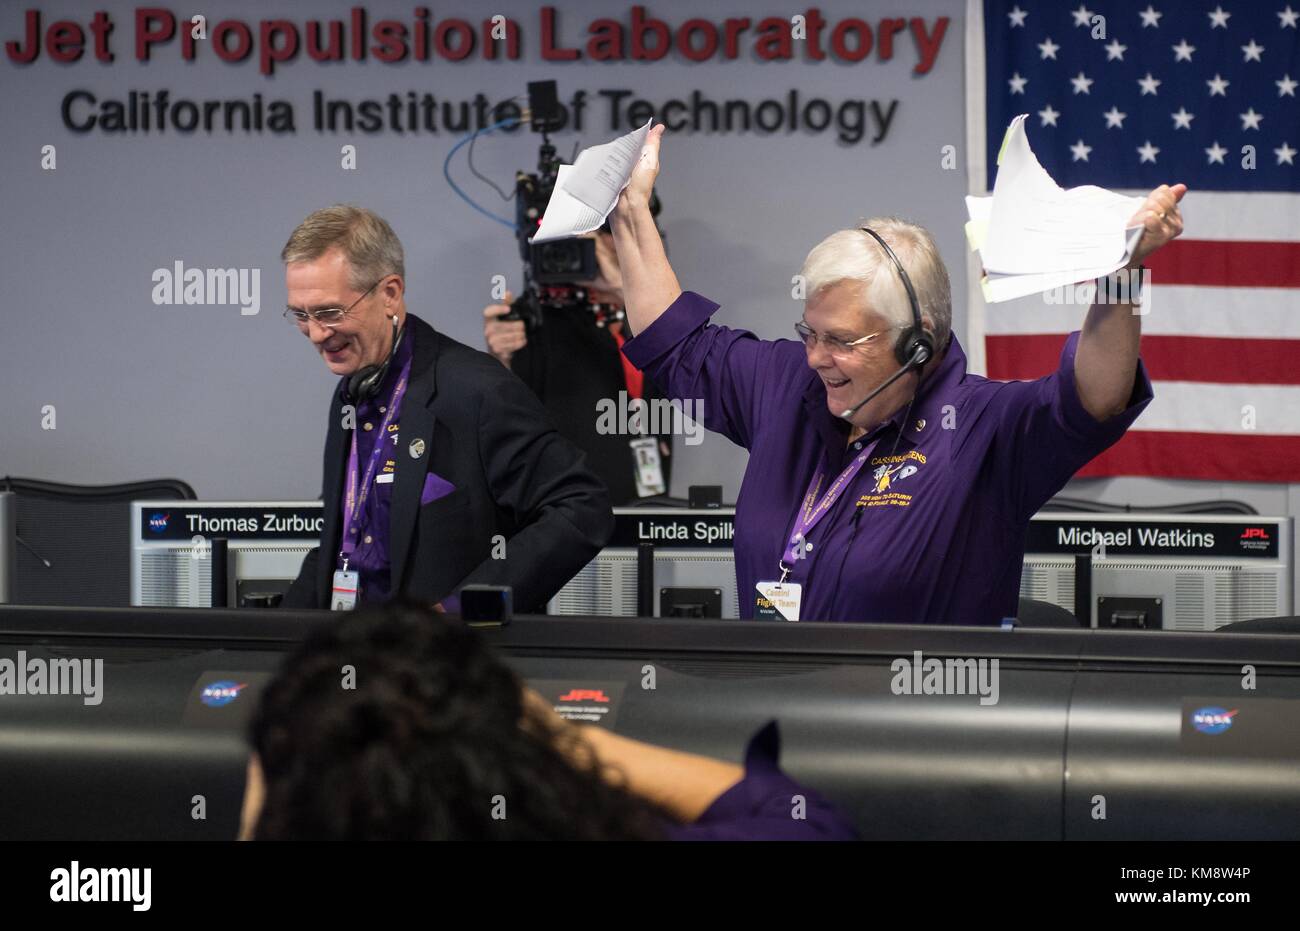 Cassini Mission Spacecraft Operations Team Manager Julie Webster rips up the final contingency plan for the Cassini mission as the Cassini spacecraft makes its final plunge into Saturn during the end of the Cassini-Huygens mission at the NASA Jet Propulsion Laboratory September 15, 2017 in Pasadena, California.  (photo by Joel Kowsky  via Planetpix) Stock Photo